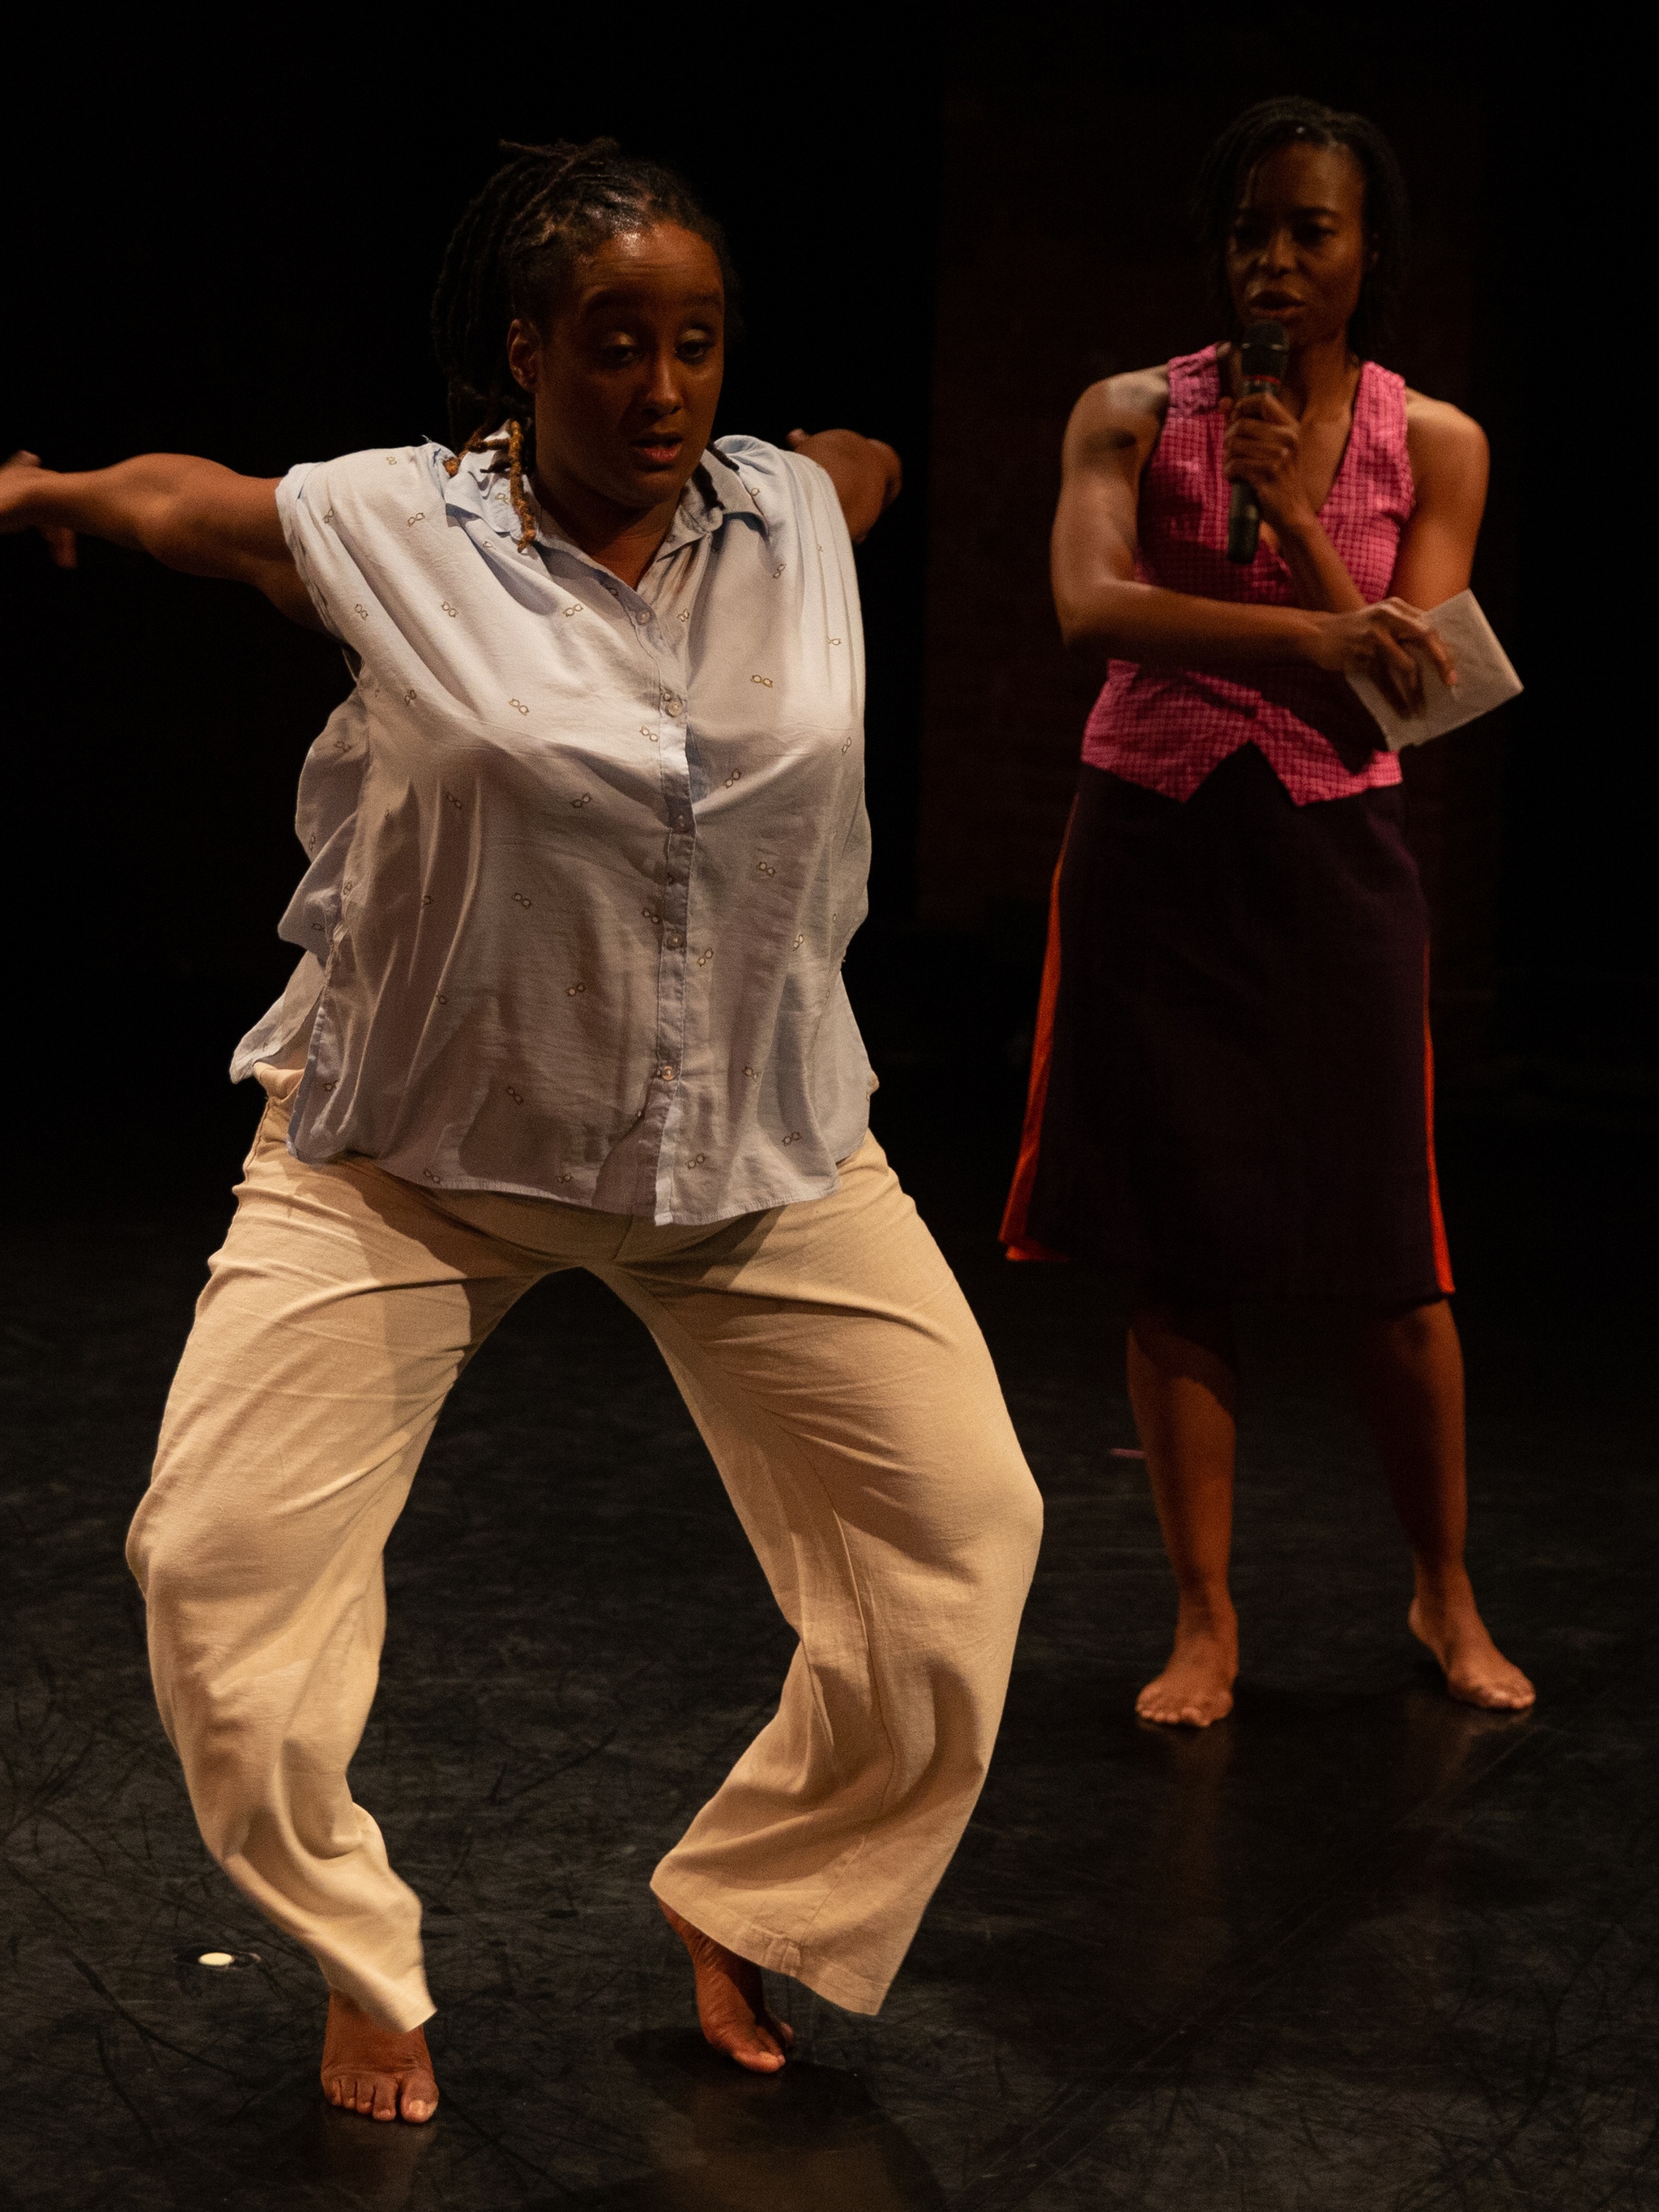 A photo of Kayla Hamilton and Nicole McClam, two dark-skinned Black women. They are both on a stage. Nicole is diagonally behind Kayla. She is wearing dark red mid-length shorts & a pink tank top. She is observing Kayla dancing. Kayla is facing front and has her knees bent as her arms are energetically swung behind her. Kayla is wearing beige pants with a white sleeveless blouse.